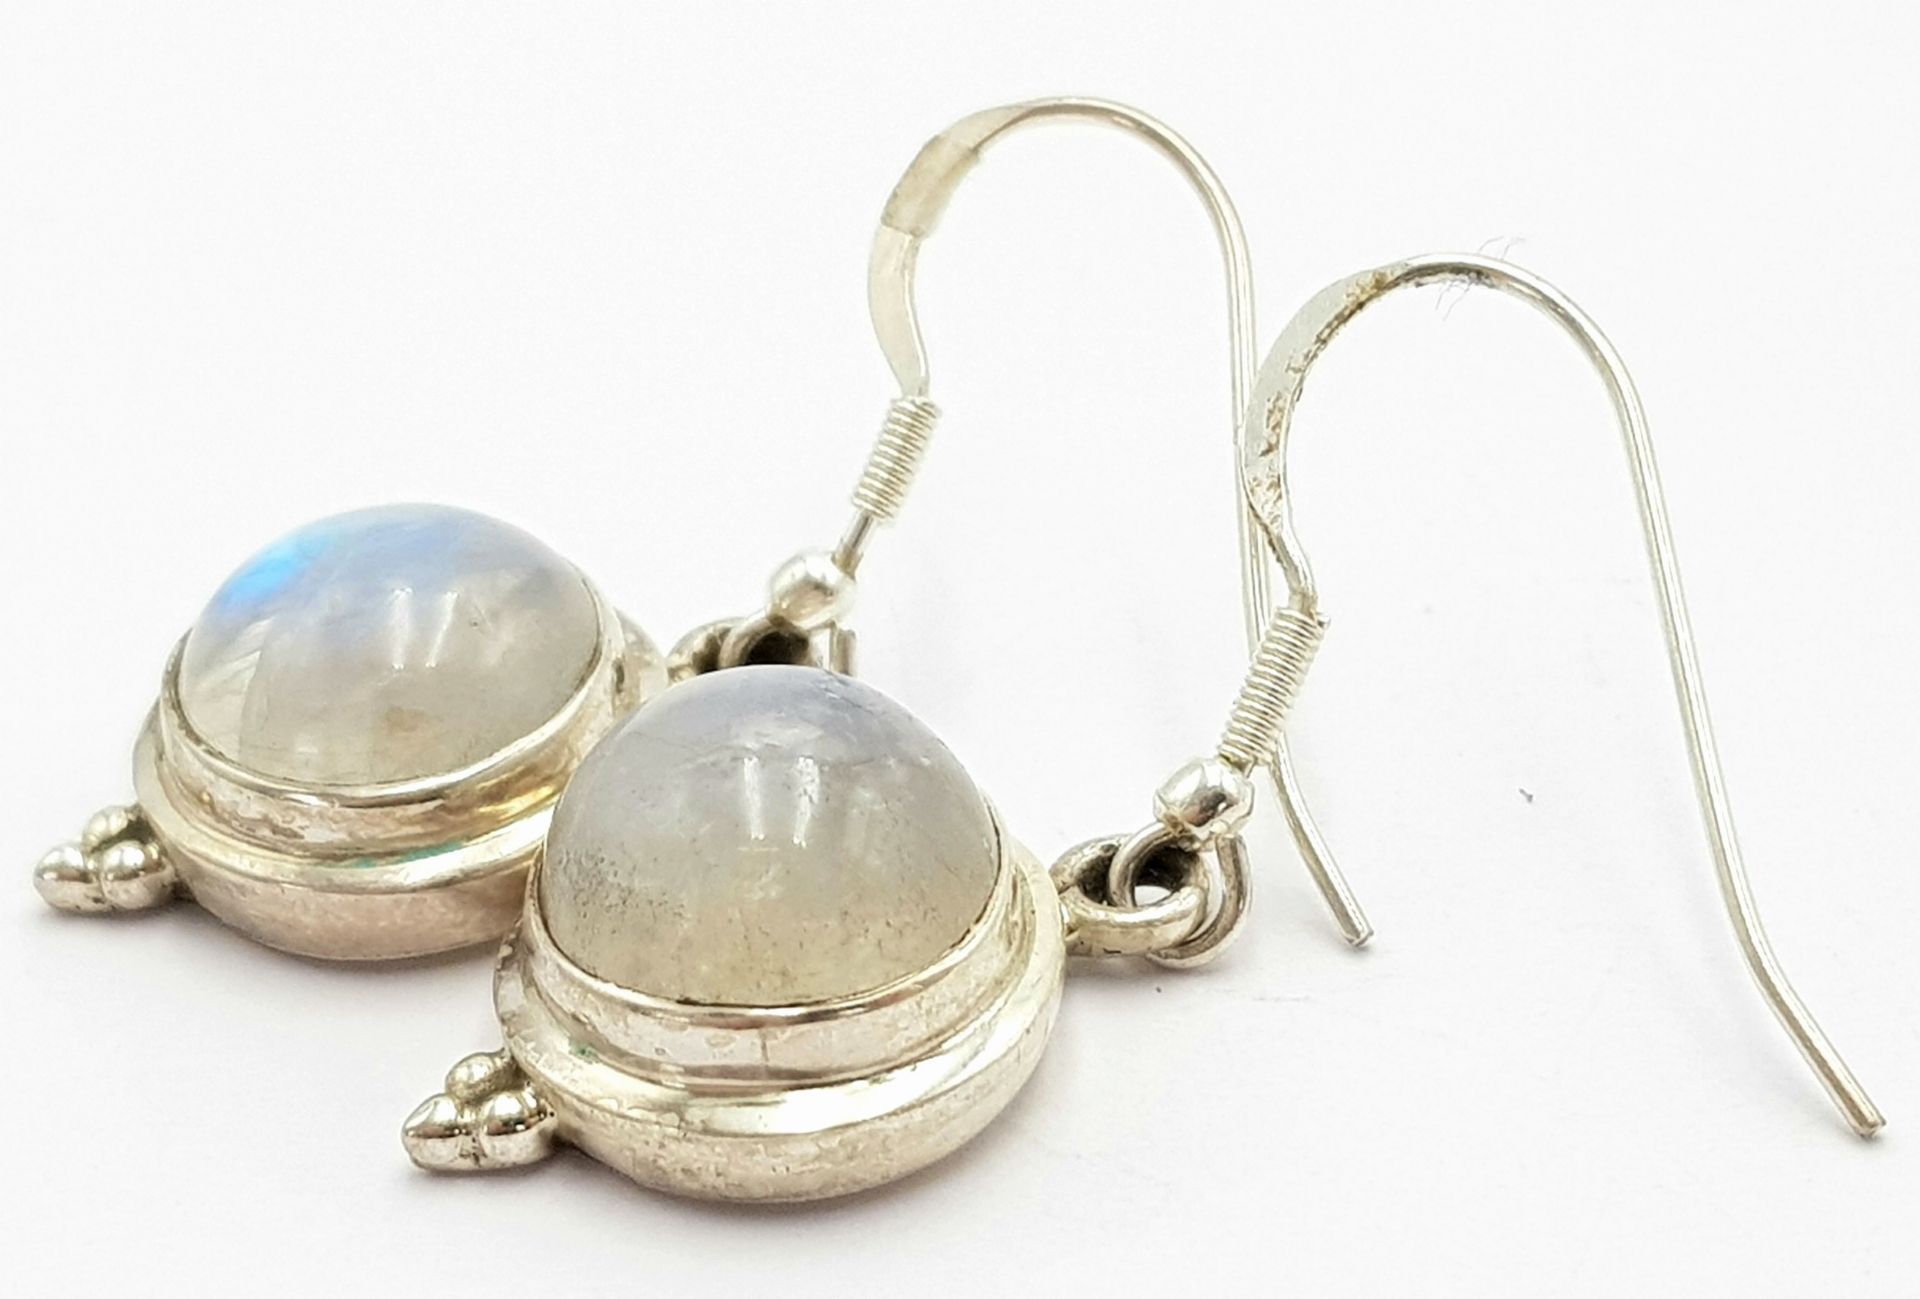 A Pair of Sterling Silver, 1cm Round Cut Cabochon Moonstone Earrings. 3.5cm Drop. - Image 4 of 5